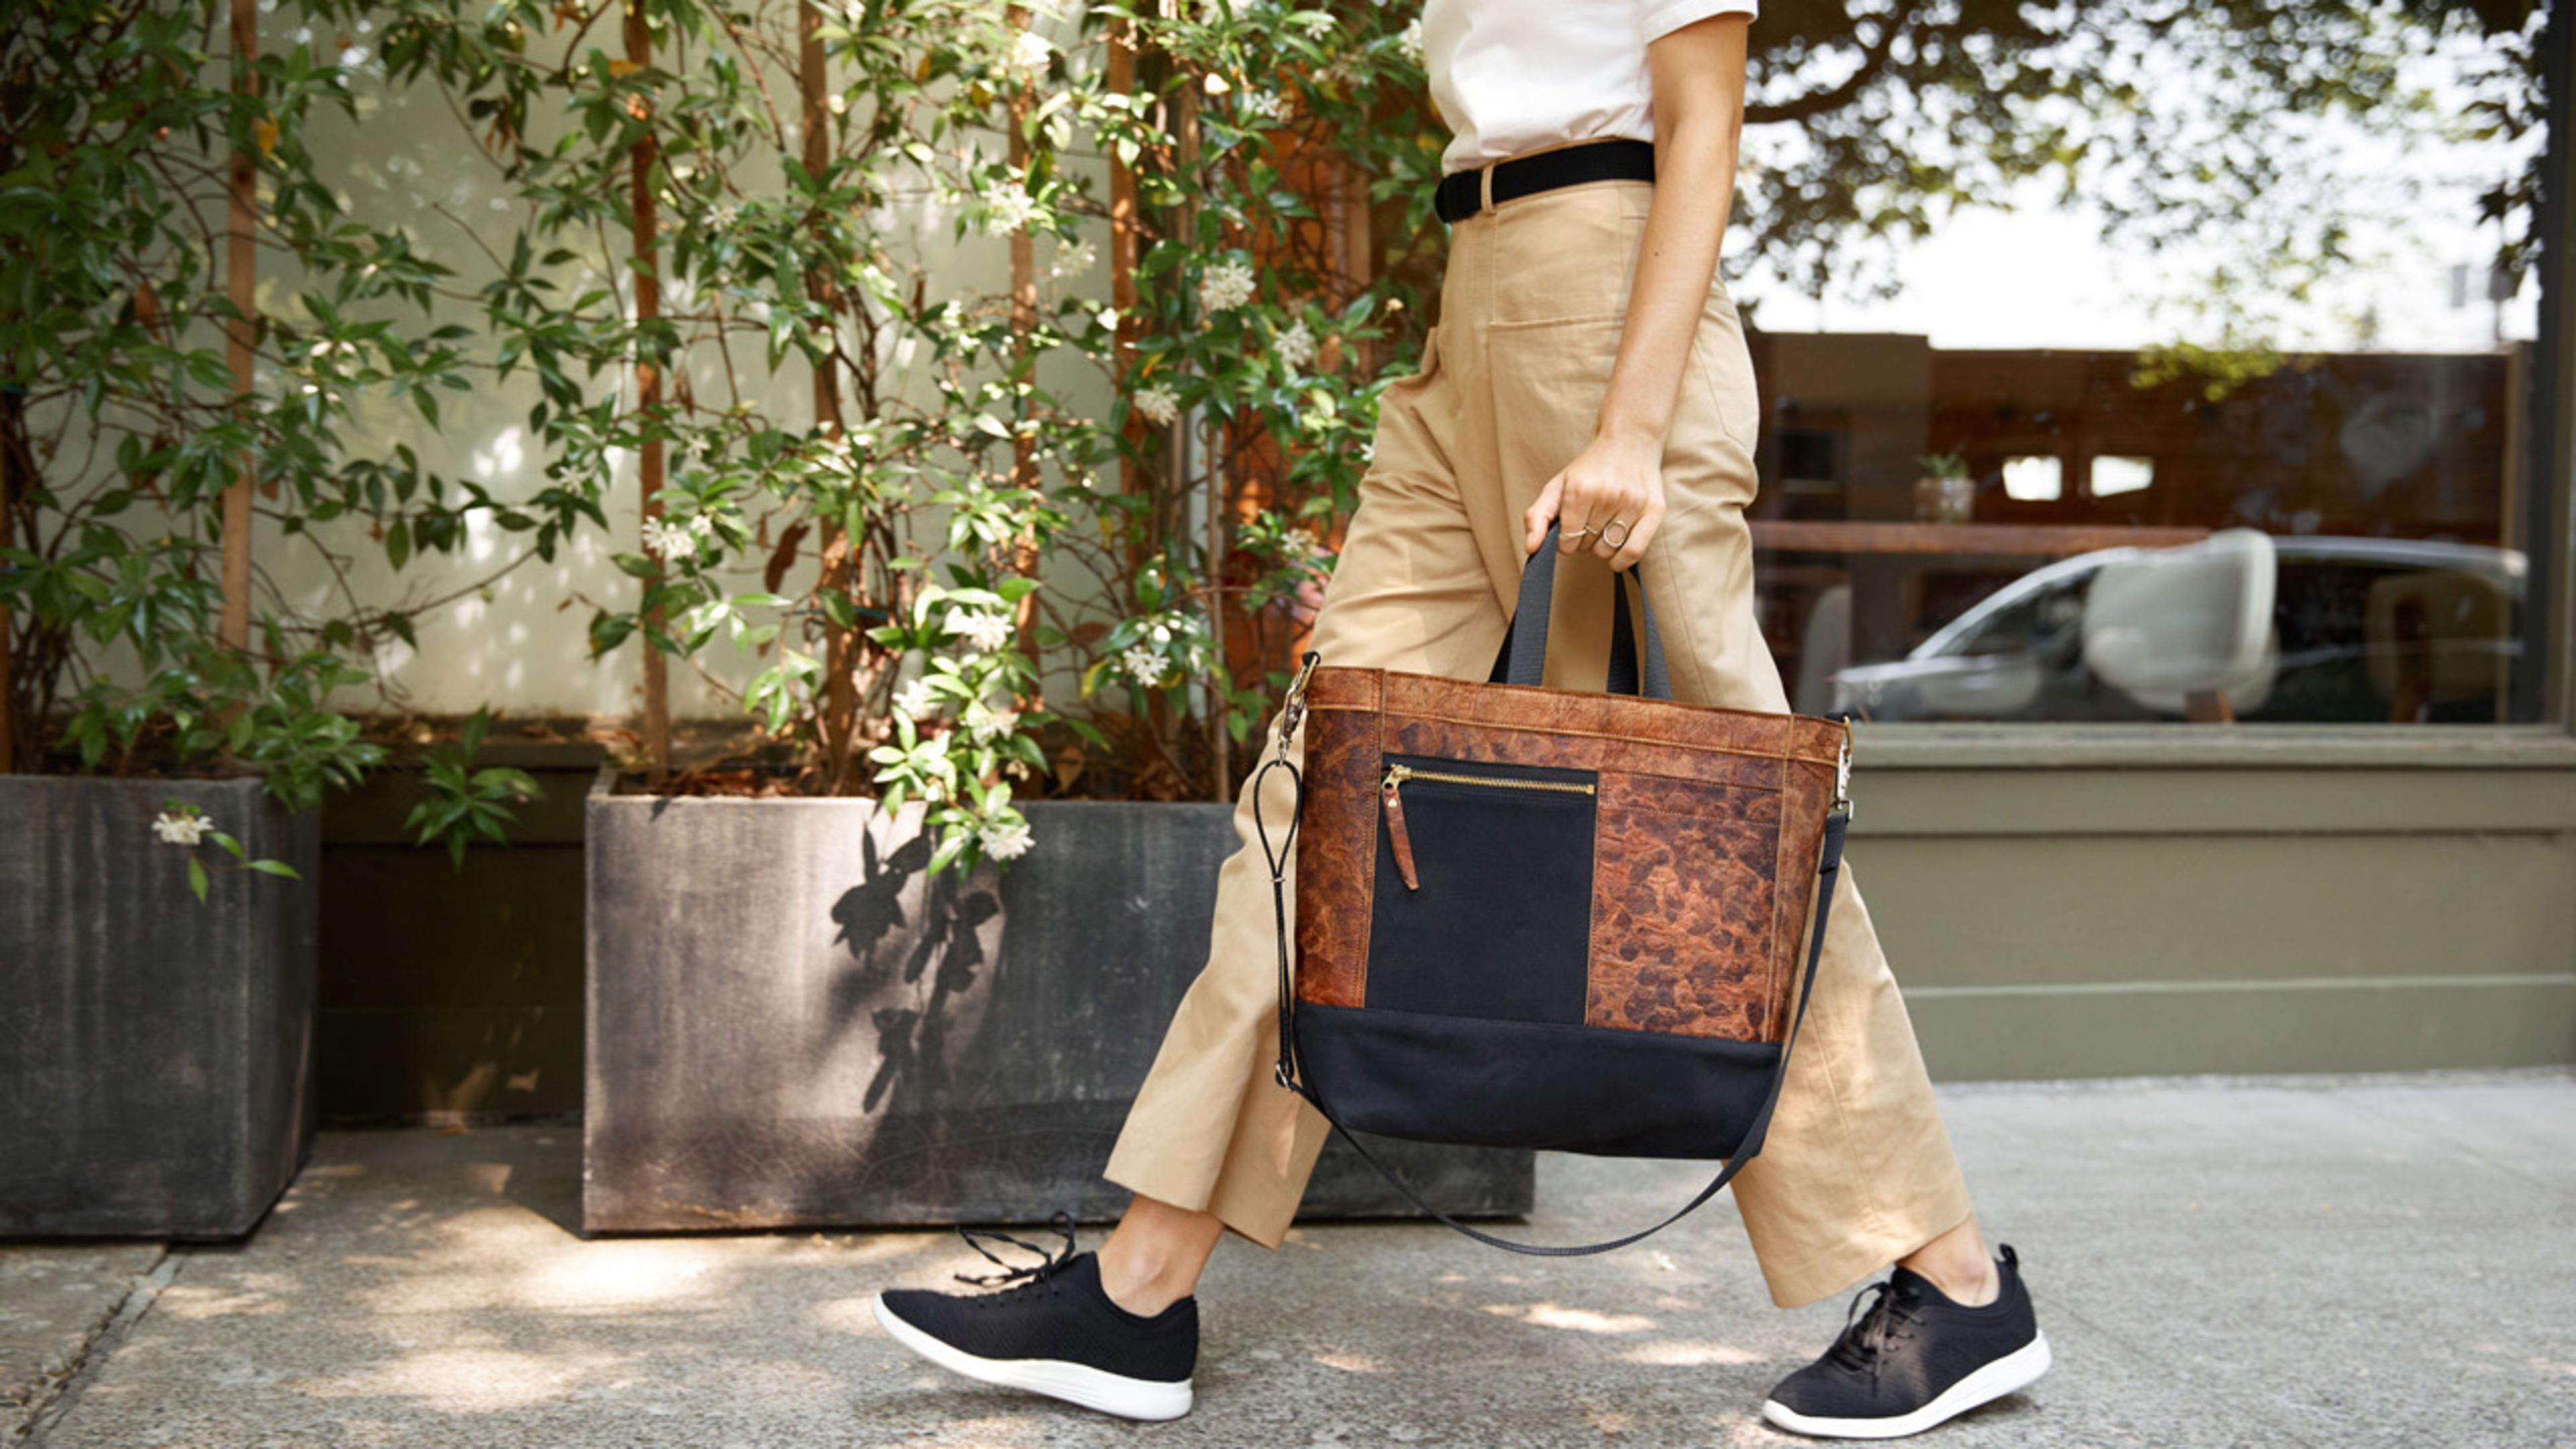 You can now buy a bag made from this mushroom “leather”